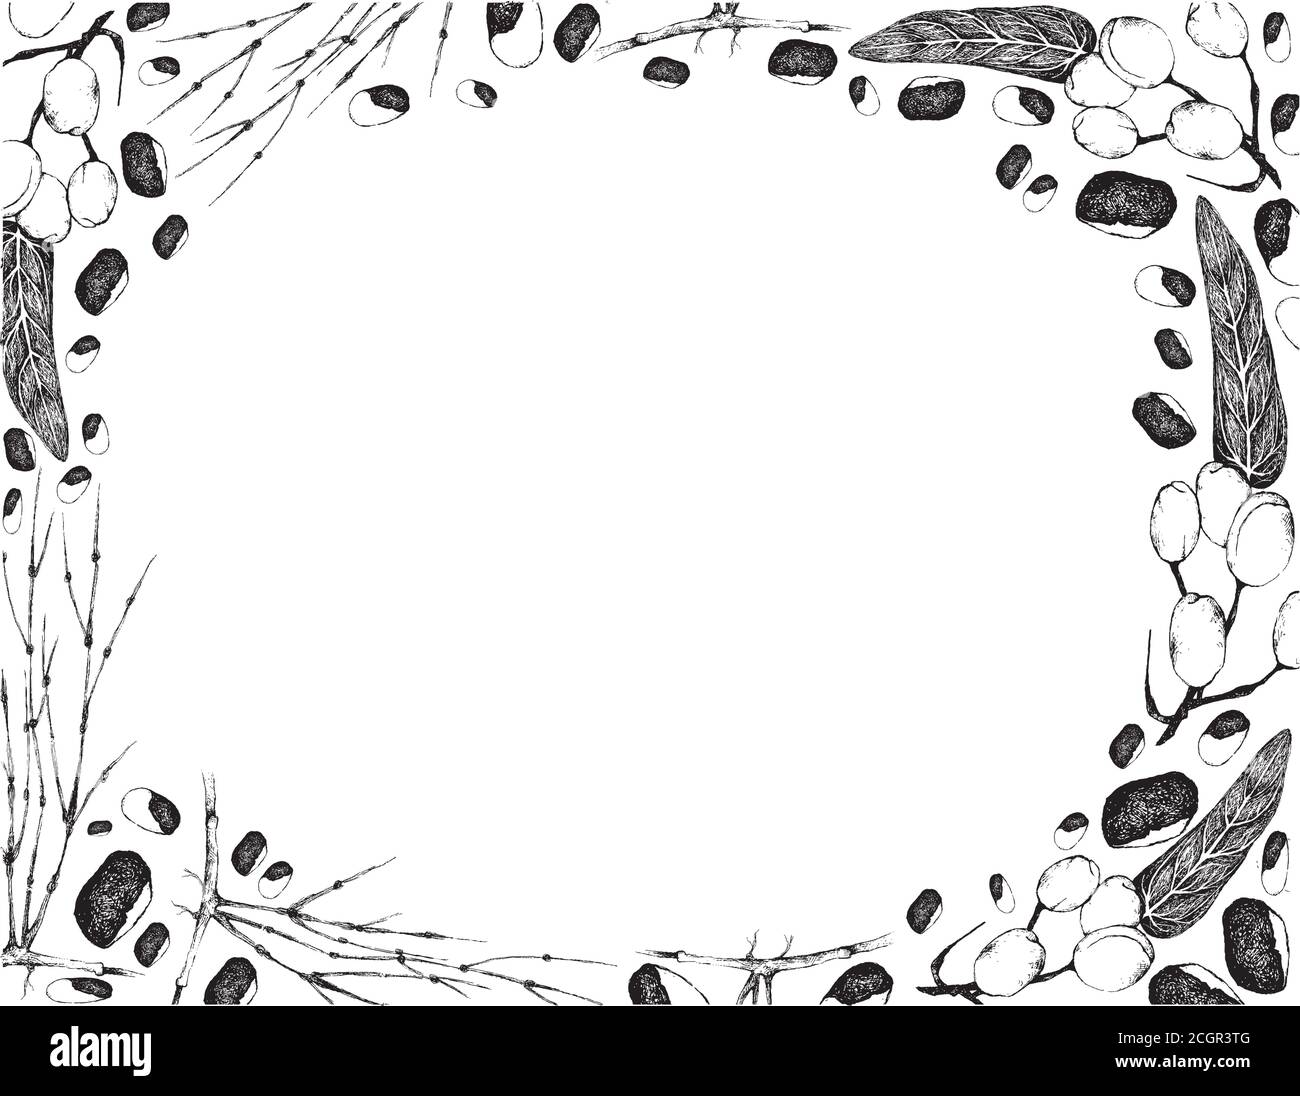 Nut and Bean, Illustration Hand Drawn Sketch Frame of Wild Almond, Barking Deer’s Mango or Irvingia Malayana Fruits with Ephedra Sinica Plants. Stock Vector